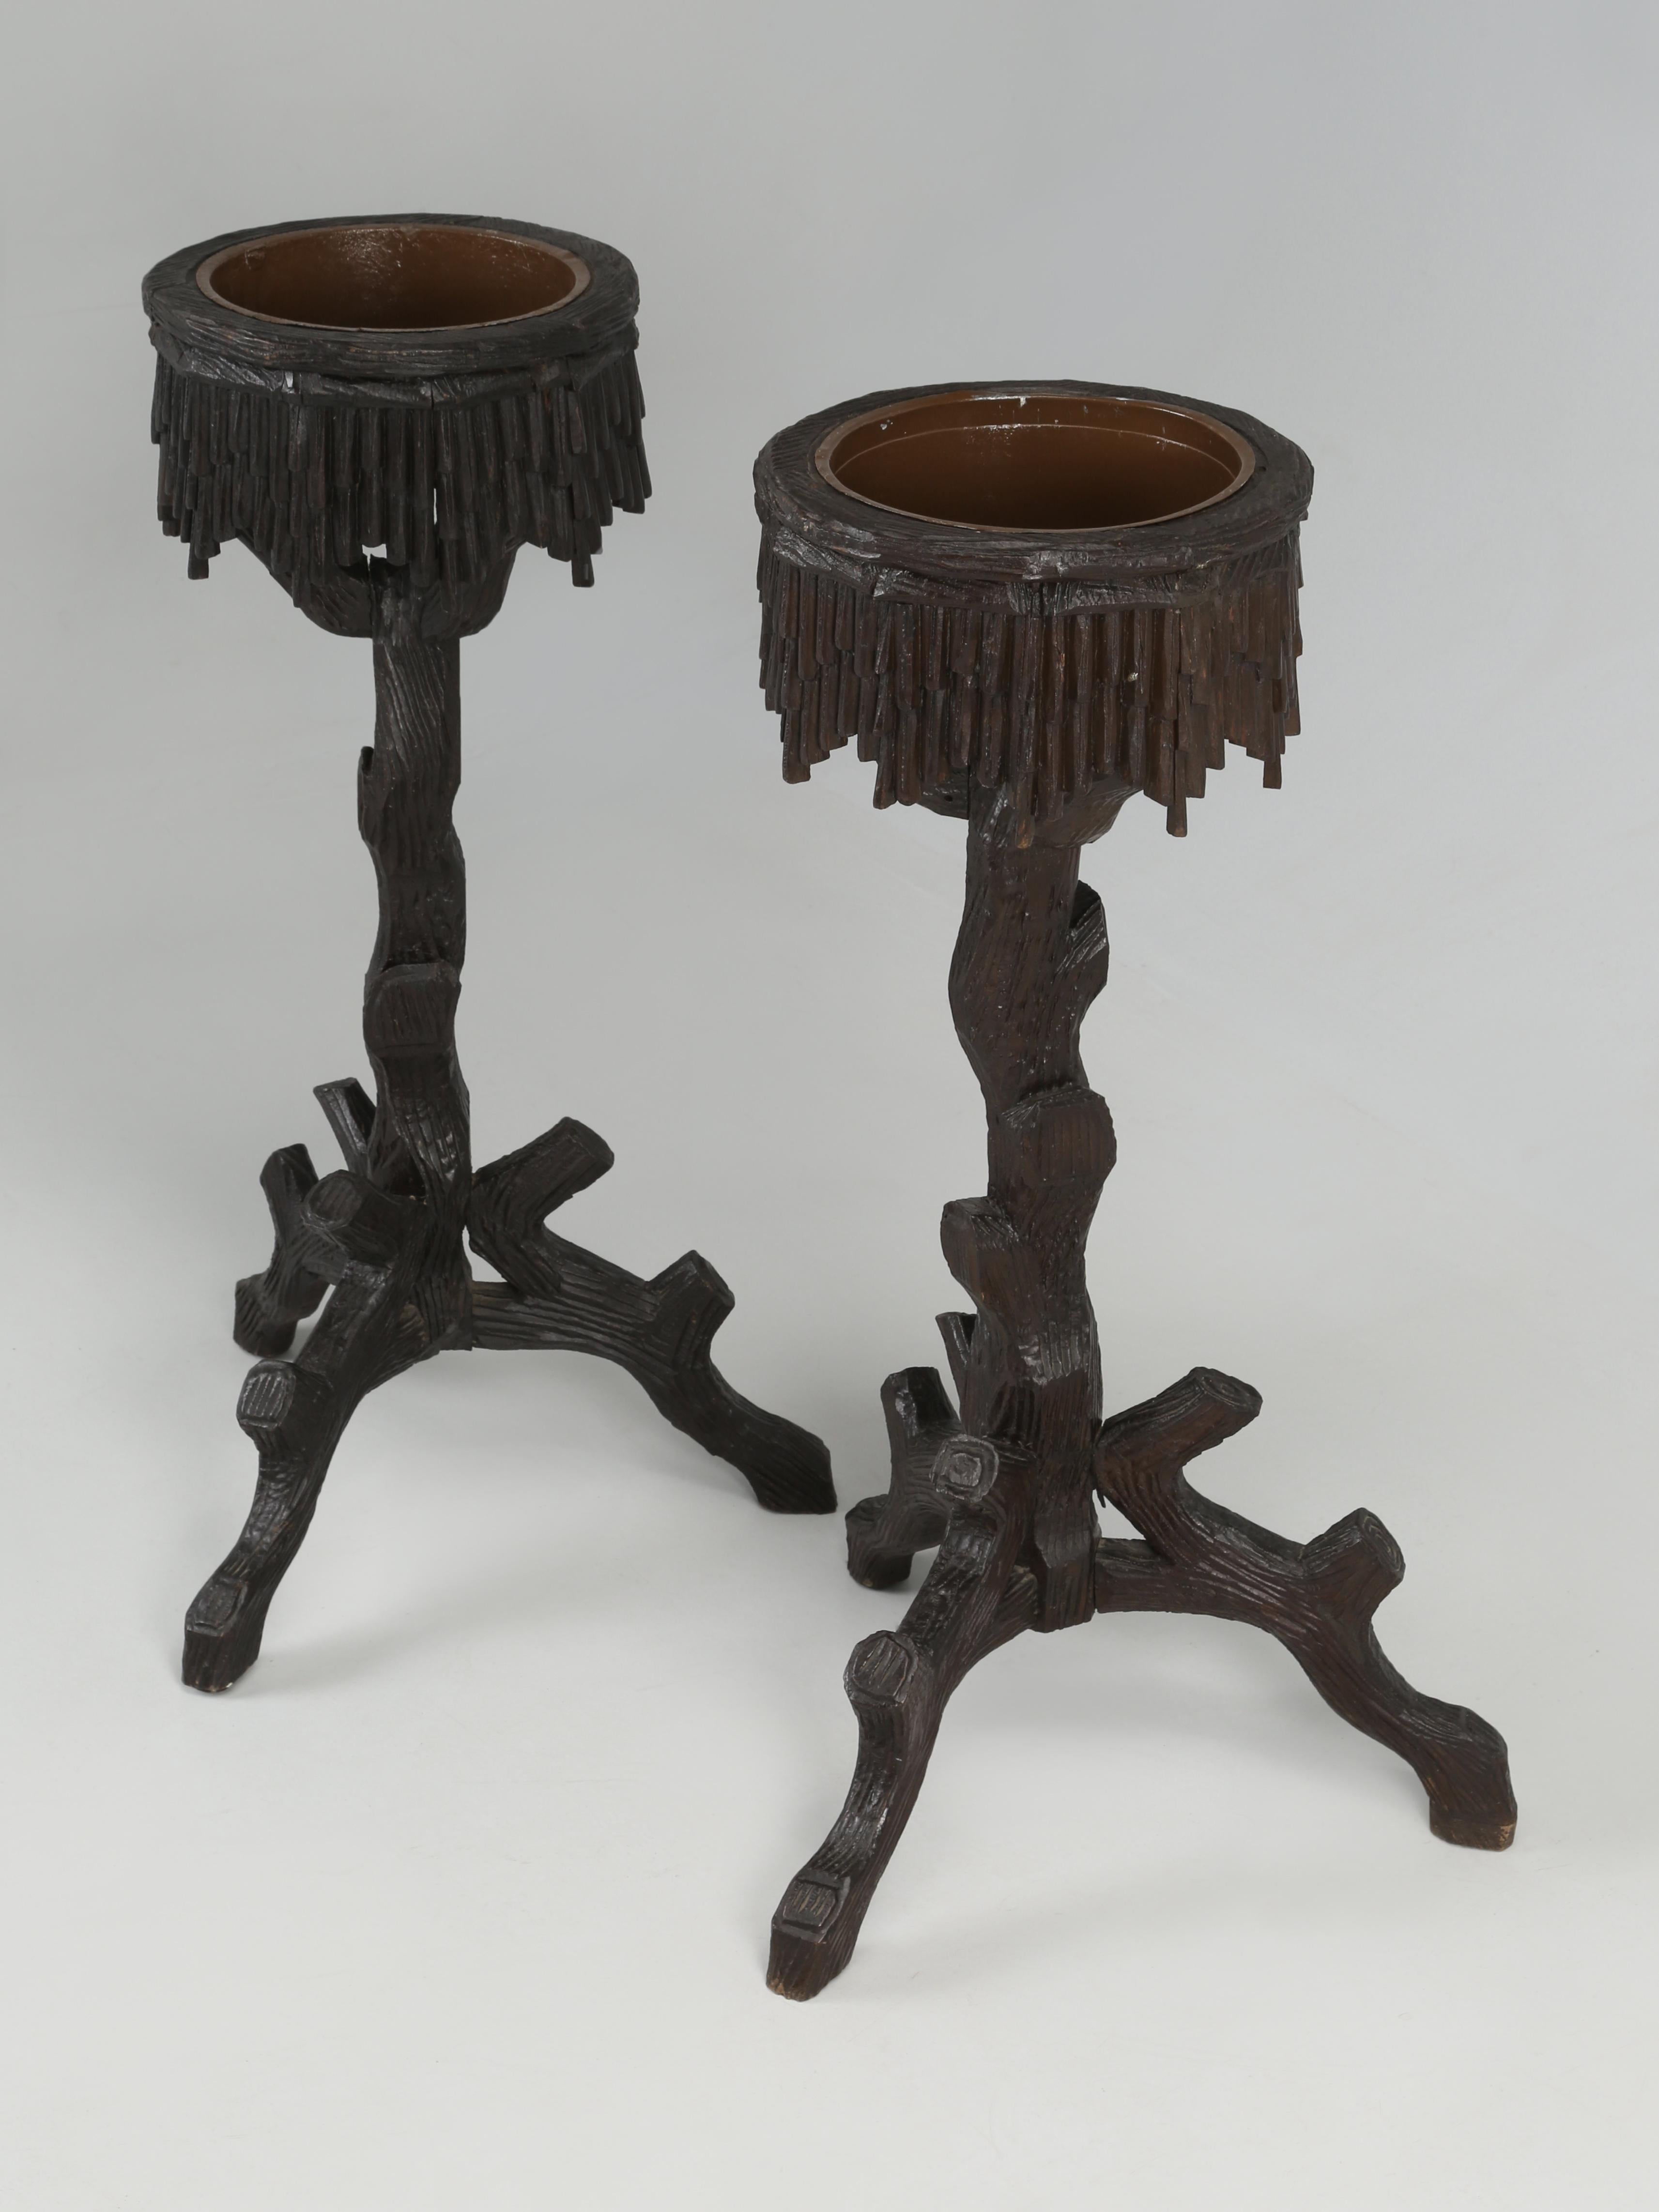 Black Forest Pair of Jardinière’s hand carved in Switzerland during the late 1800s. The Jardinière’s are complete with their original metal liners and are ready to be planted. Black Forest Furniture first began to appear in the mid-1800s in Brienz,